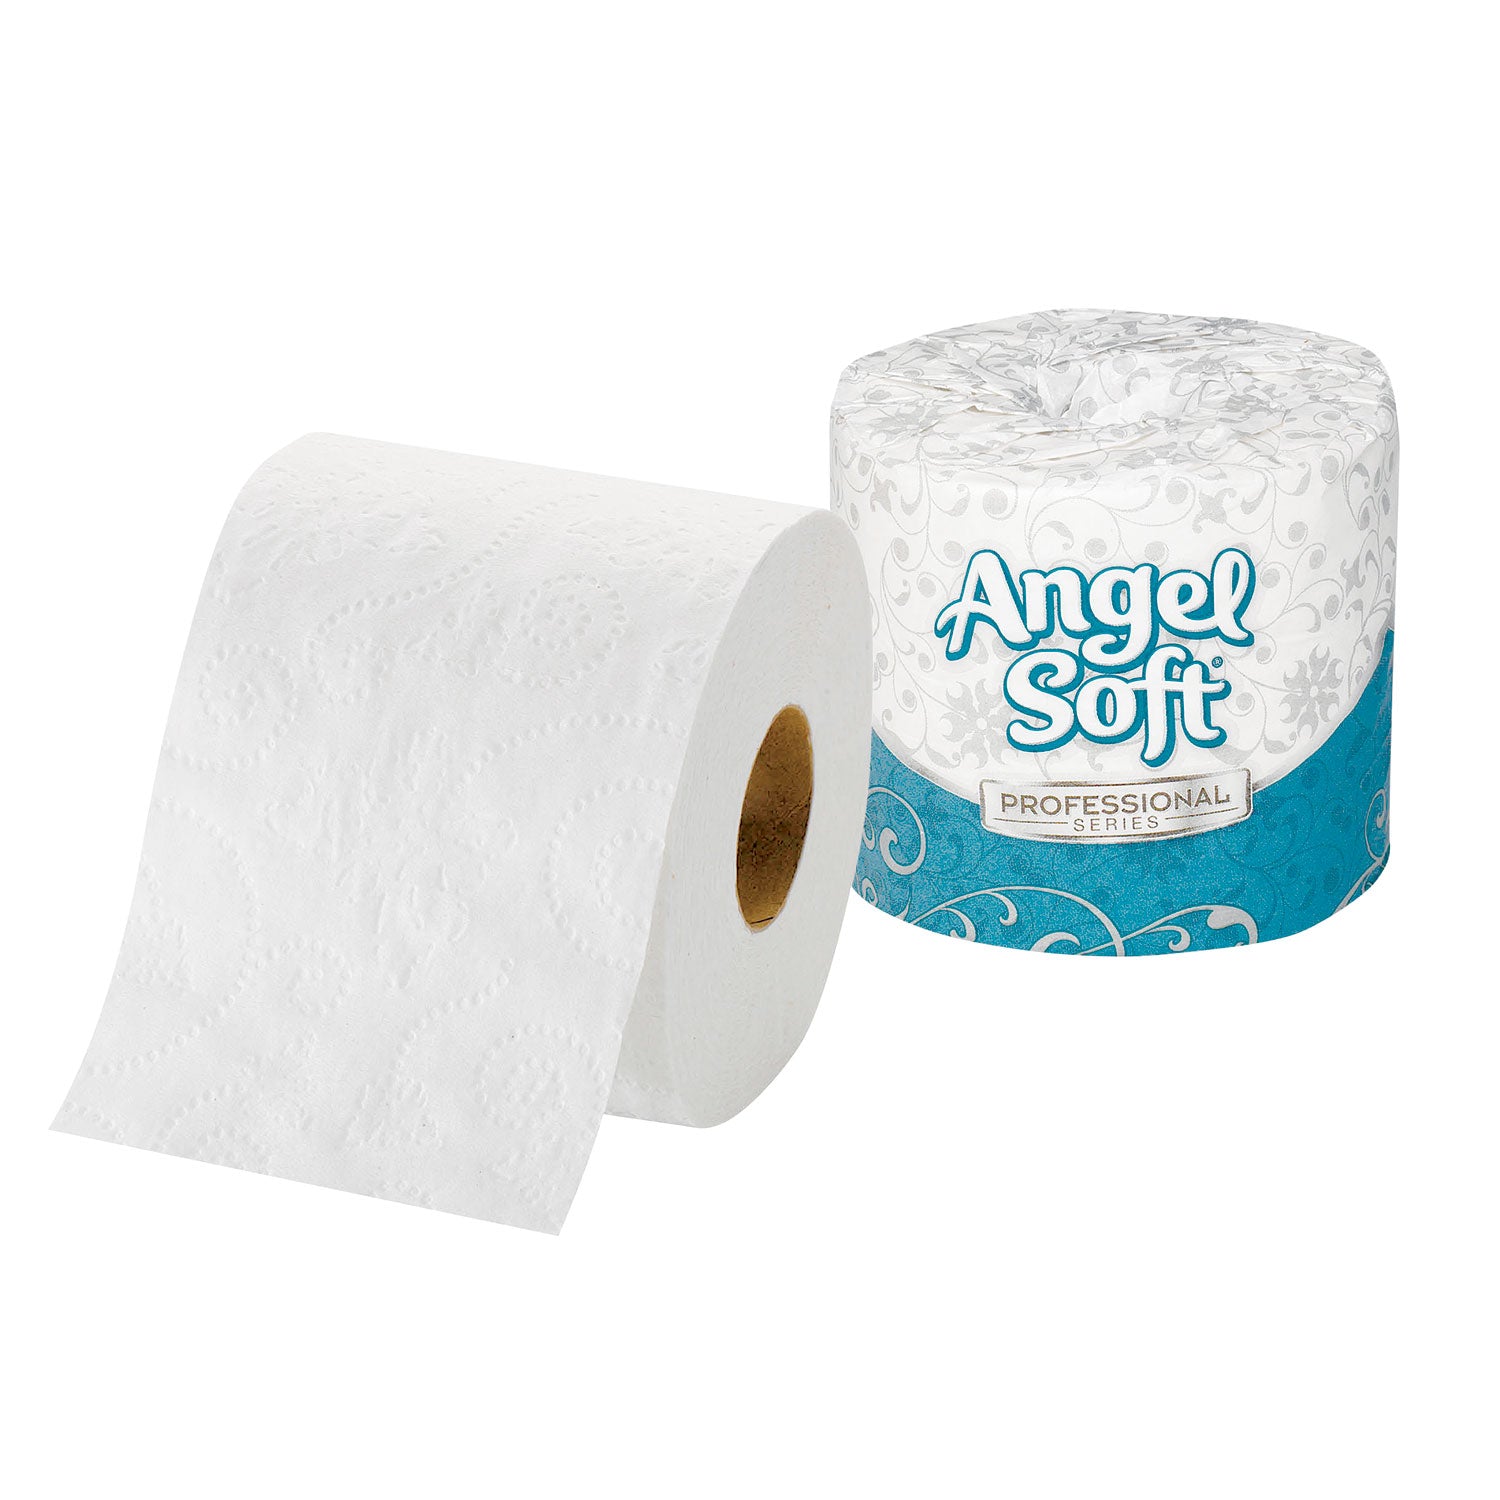 Angel Soft ps Premium Bathroom Tissue, Septic Safe, 2-Ply, White, 450 Sheets/Roll, 40 Rolls/Carton - 